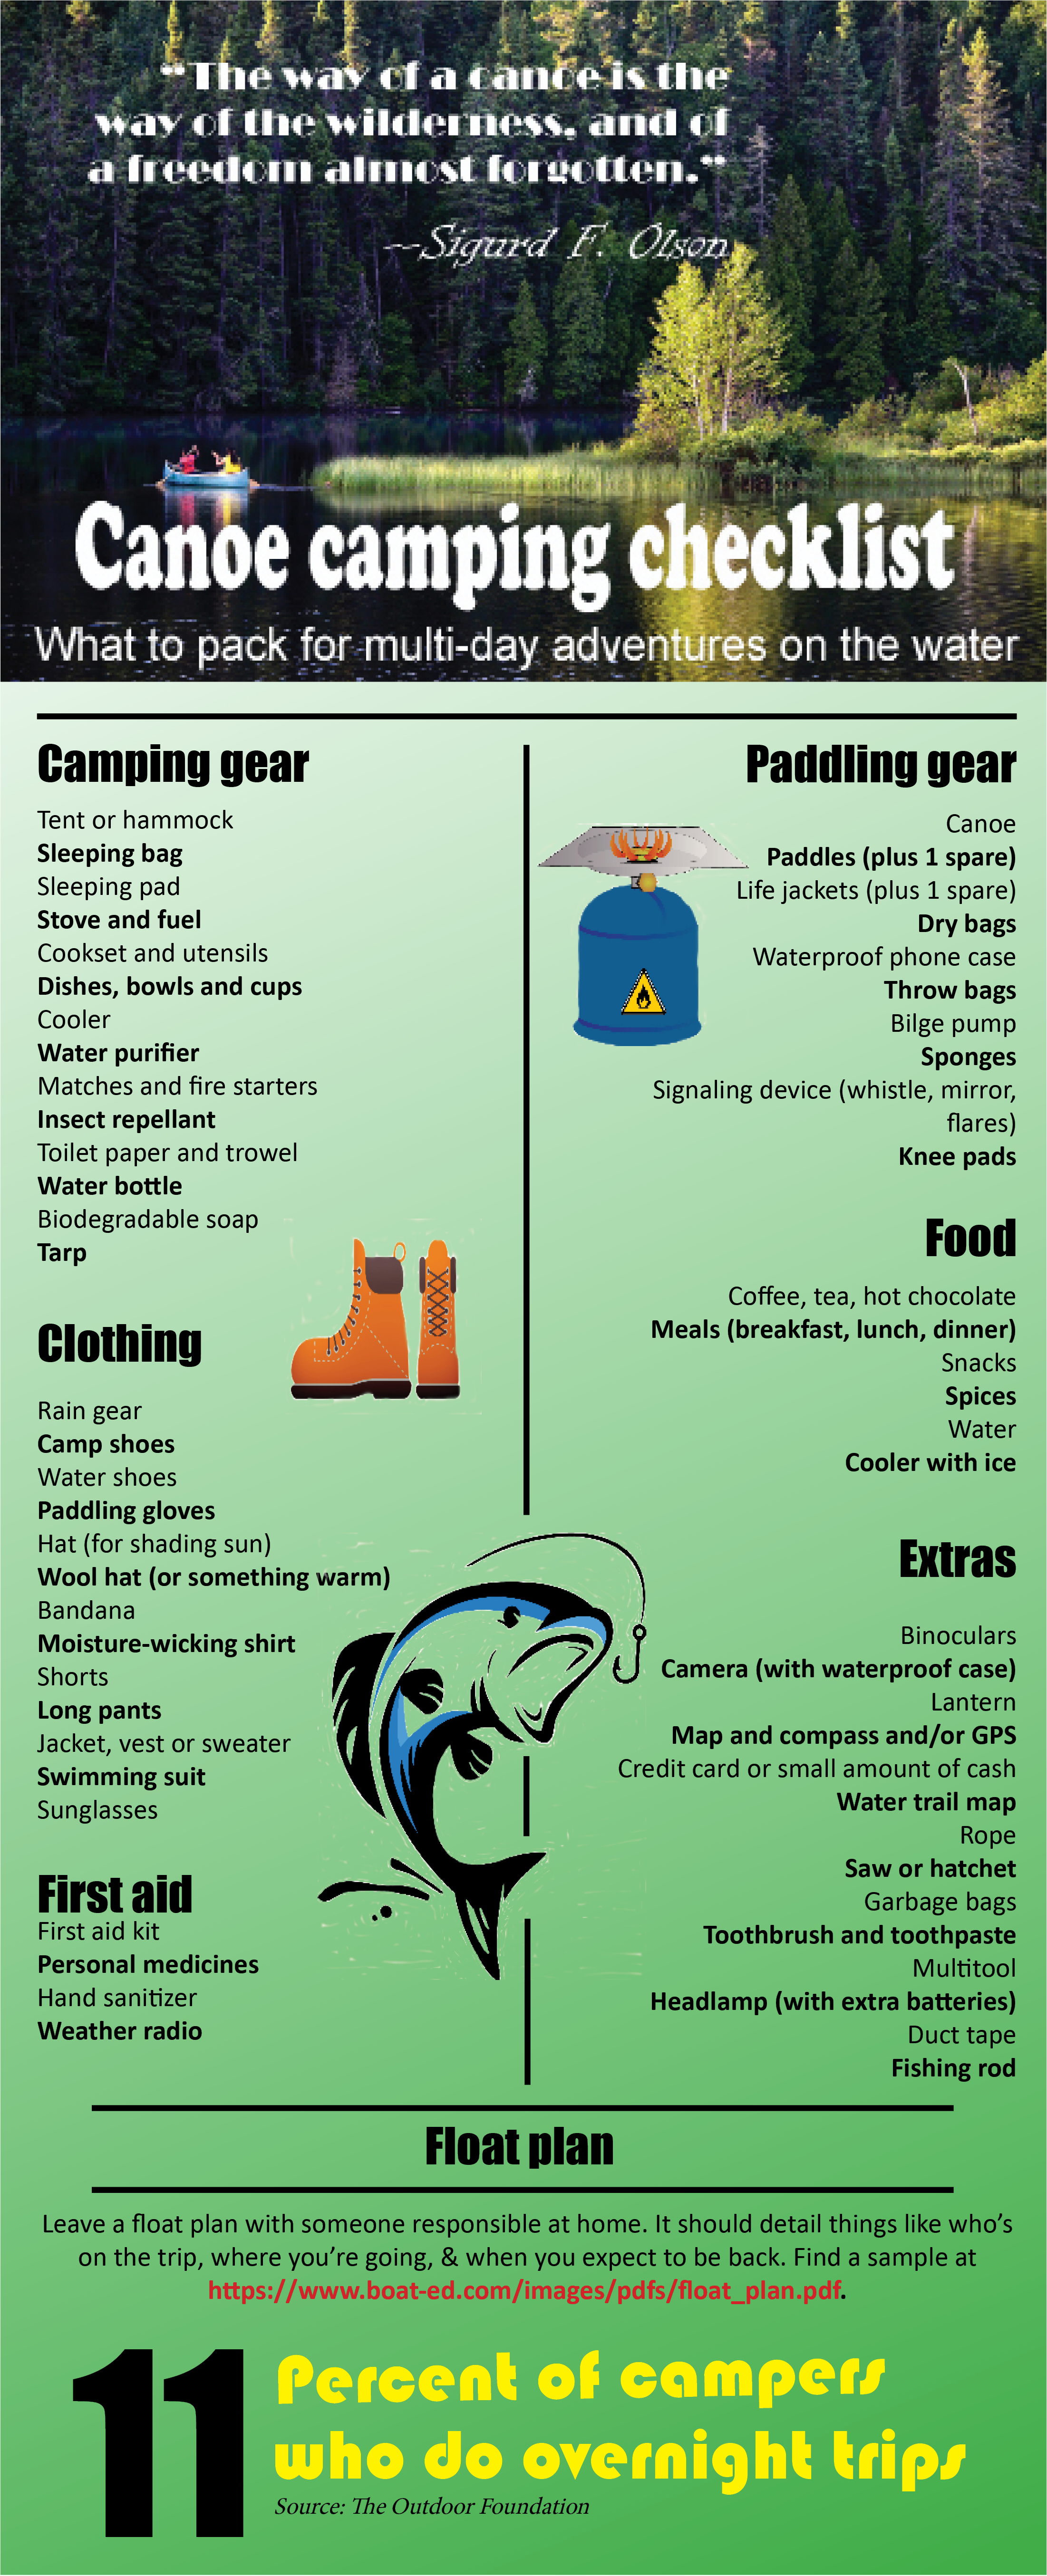 A canoe camping checklist is handy.